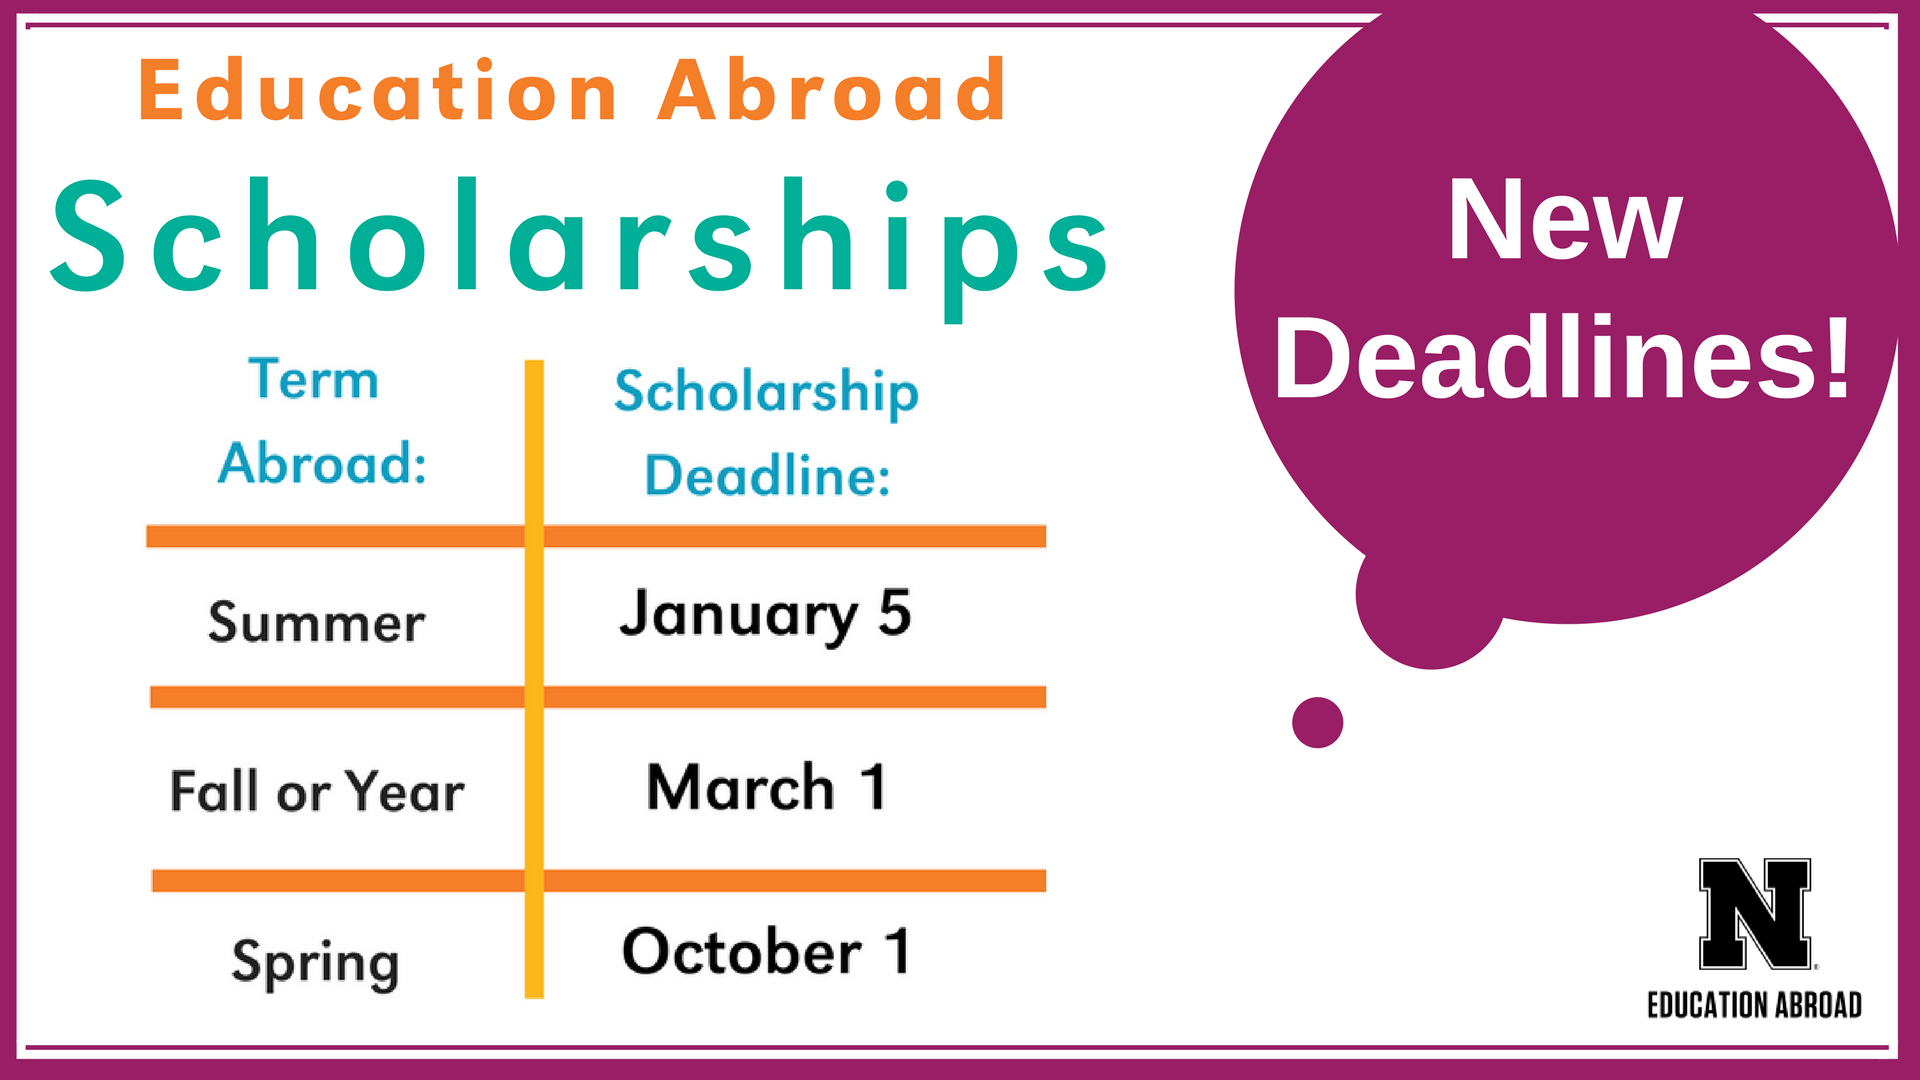 education-abroad-scholarships-new-deadlines-announce-university